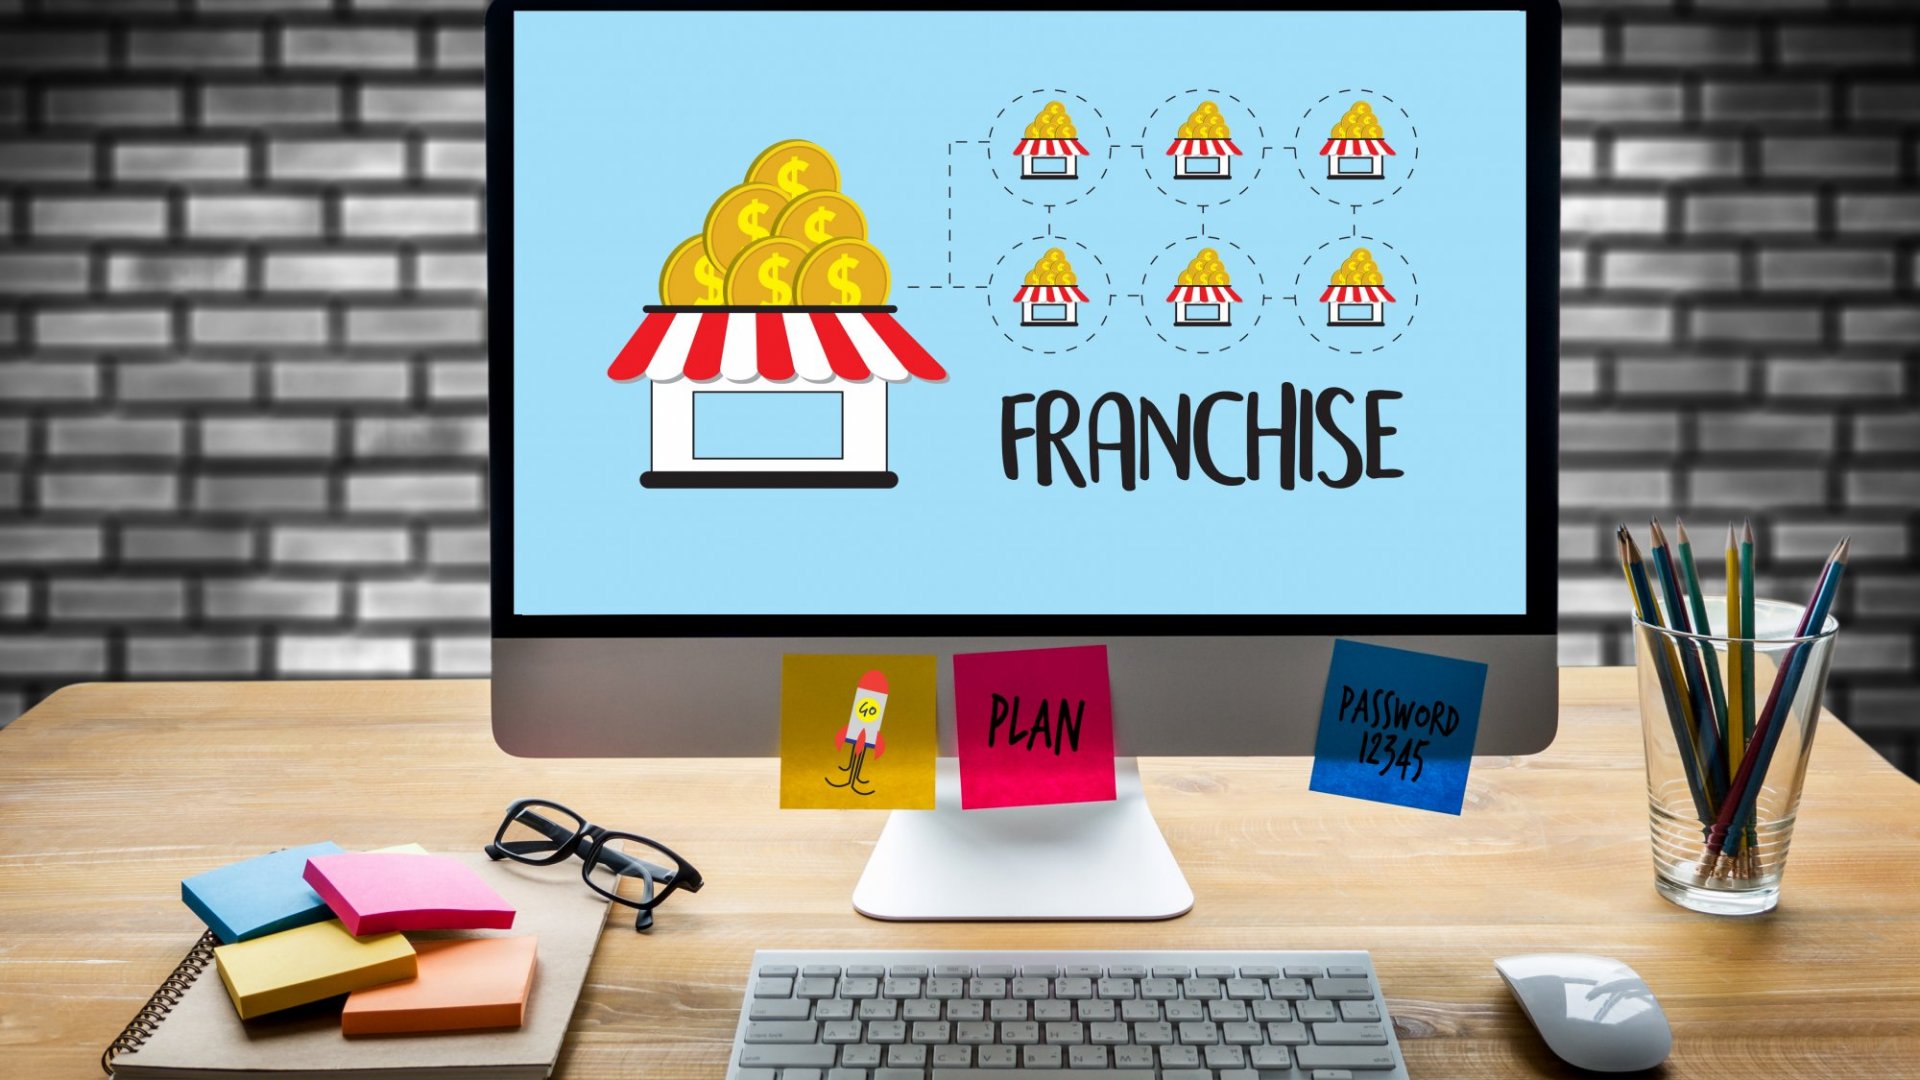 FRANKART GLOBAL STARTING WITH A FRANCHISE